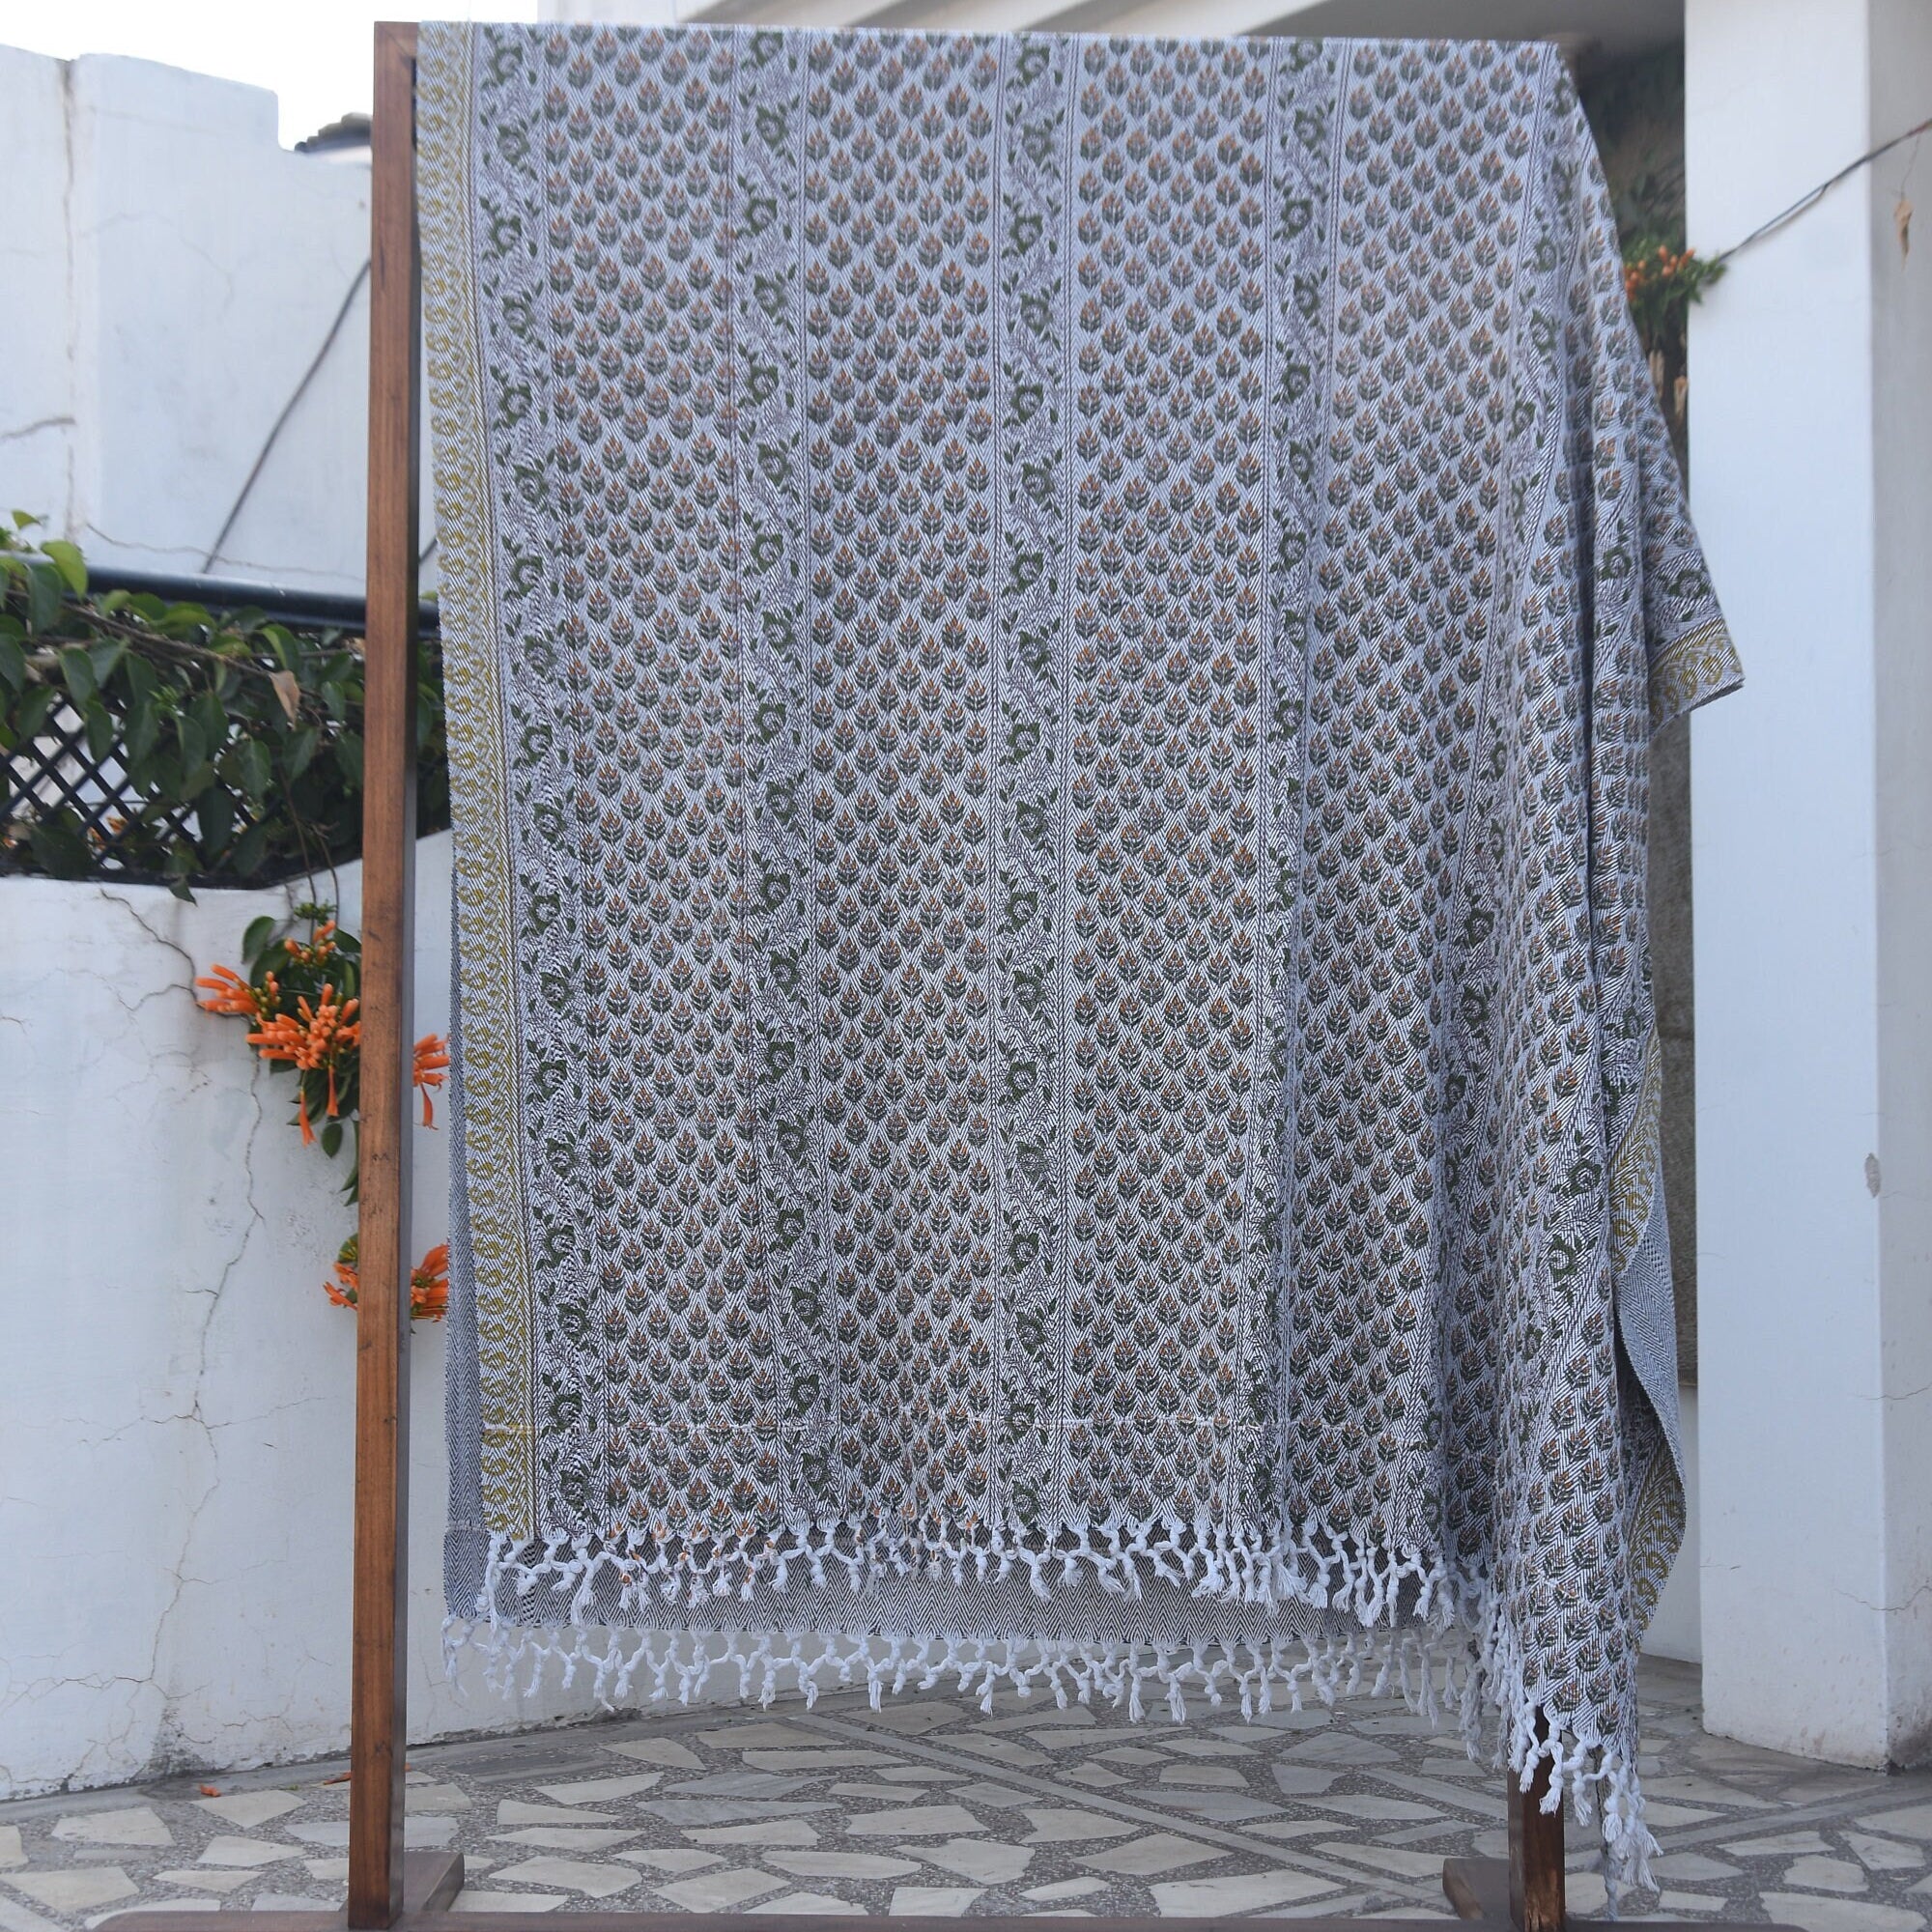 Blankets and throws, Handmade block print fabric, throws for couch, Handwoven throws, handloom fabric - ALIA